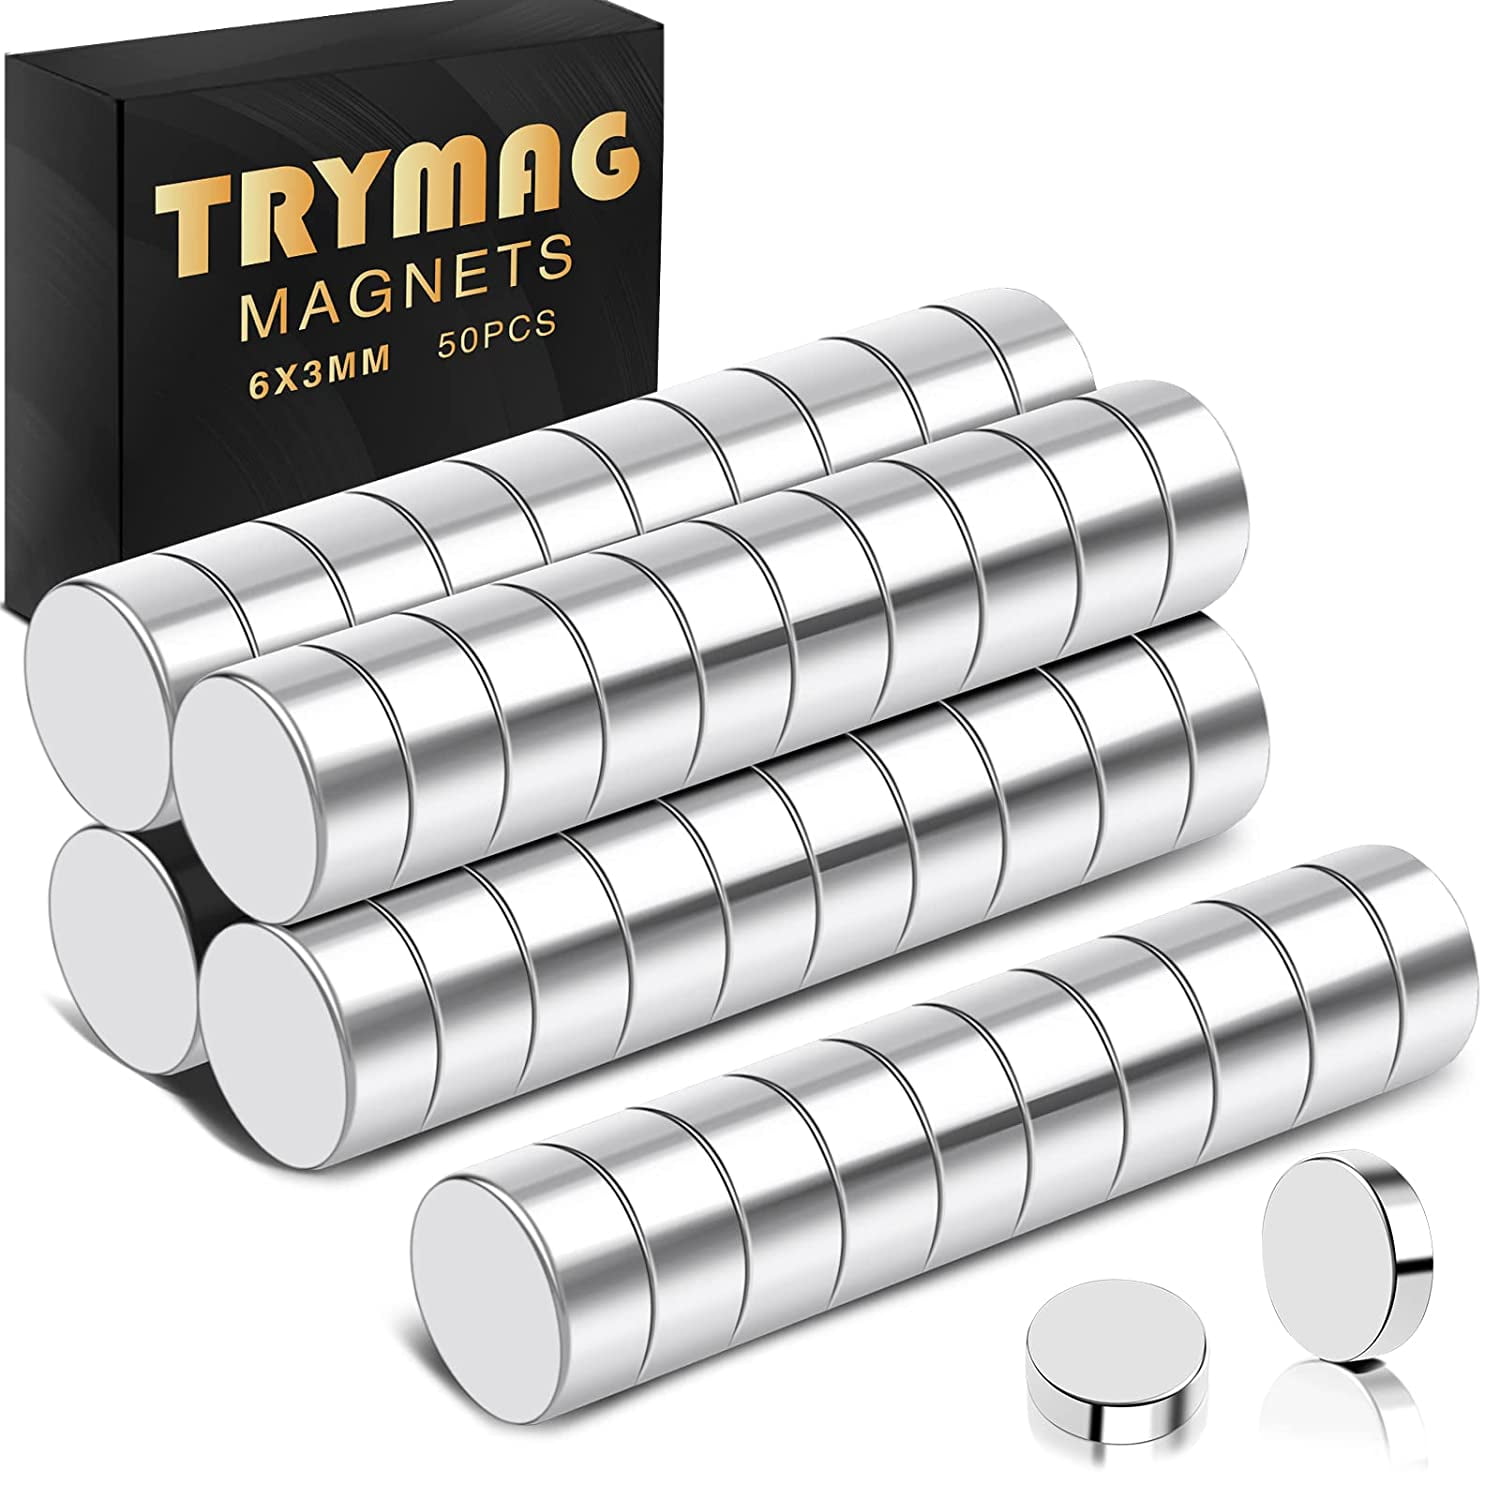 FINDMAG 100 Pcs Mini Magnets, Small Magnets, 8x2mm Tiny Magnets, Fridge Magnets, Refrigerator Magnets, Magnets for Whiteboard, Magnets for Crafts